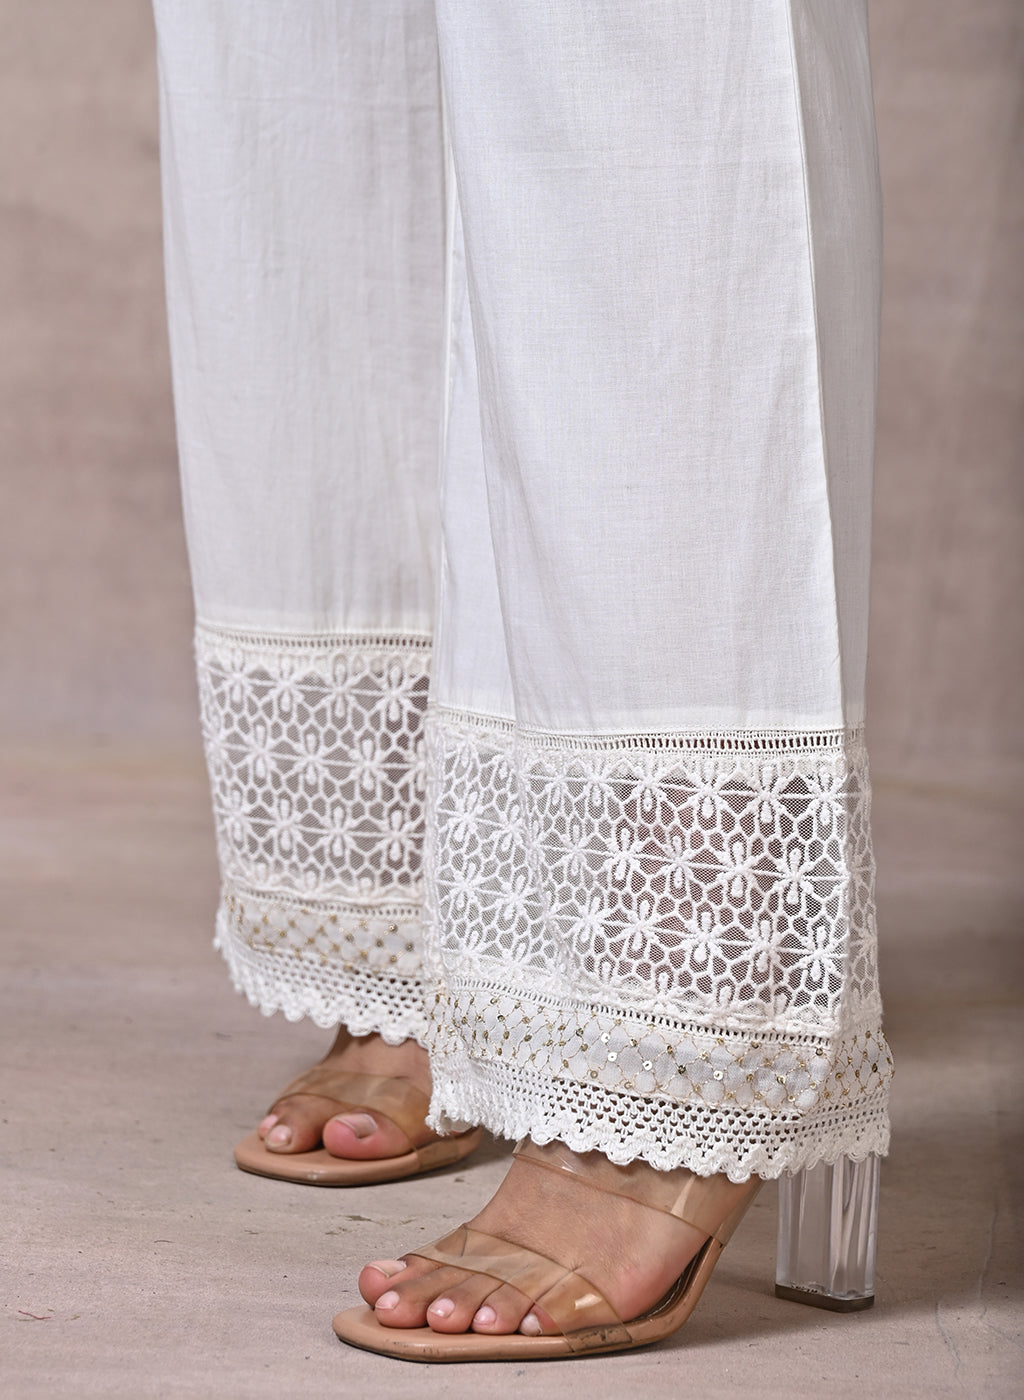 Off White Palazzos With Shimmery Details At The Hems